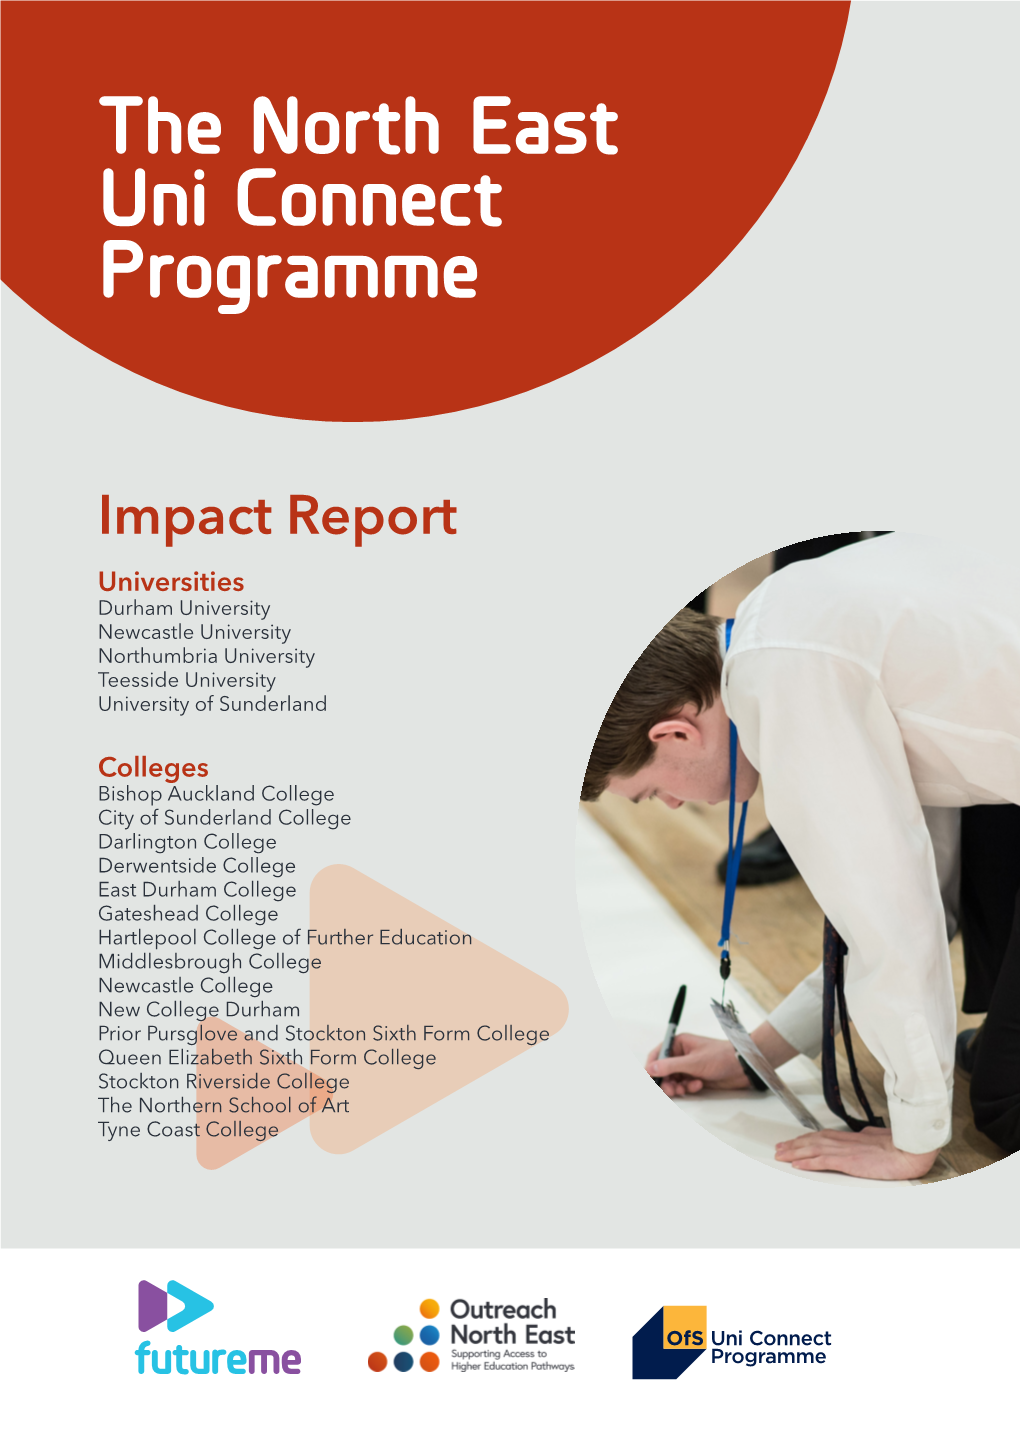 The North East Uni Connect Programme